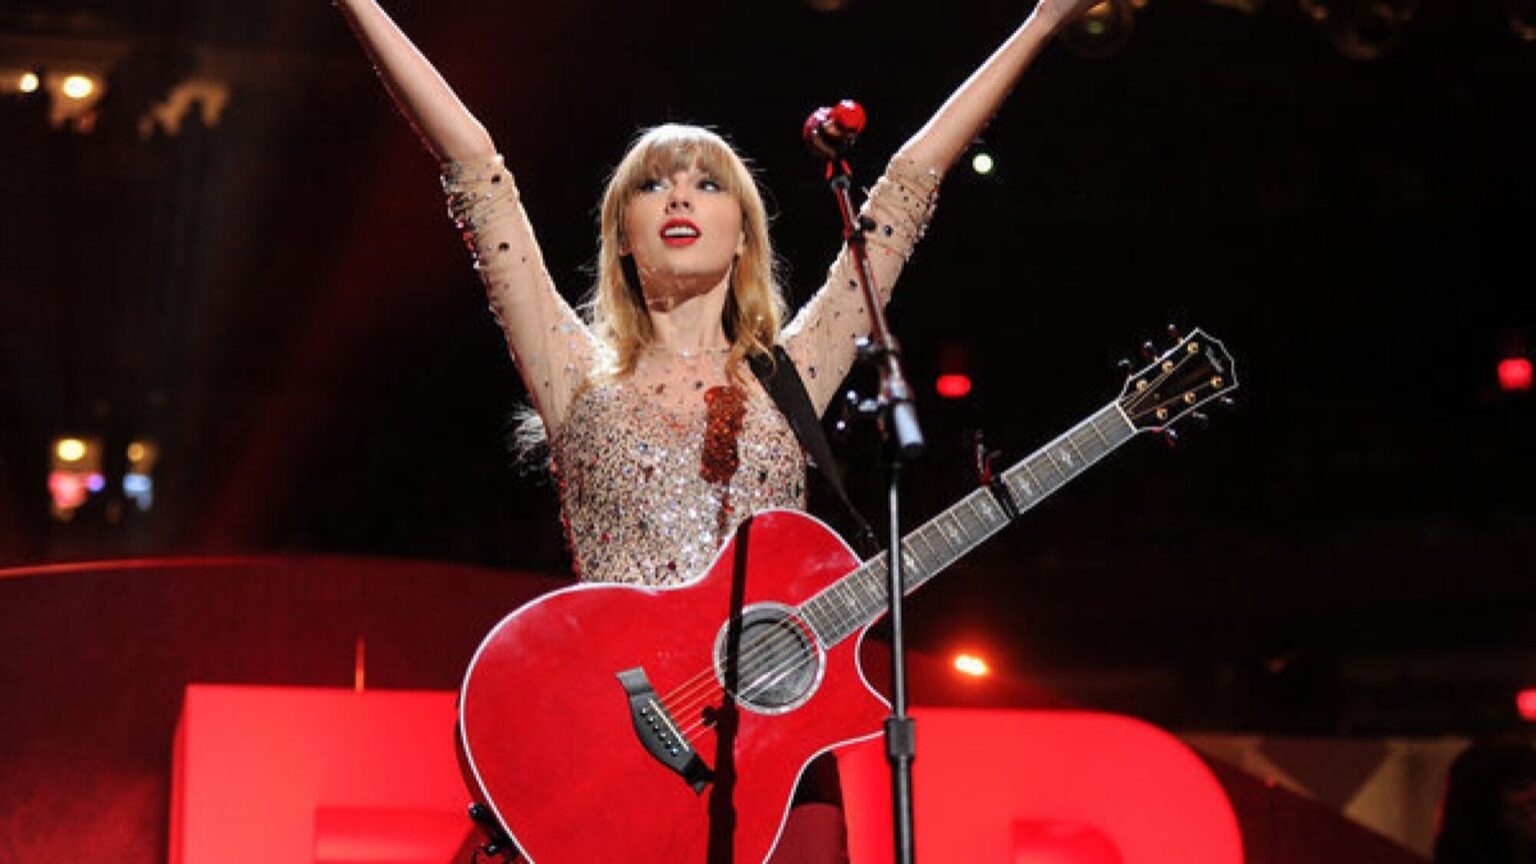 Taylor Swift just dropped some exciting news on the upcoming 'Red' album re-recording. Find out who the star will be collaborating with on the album here.